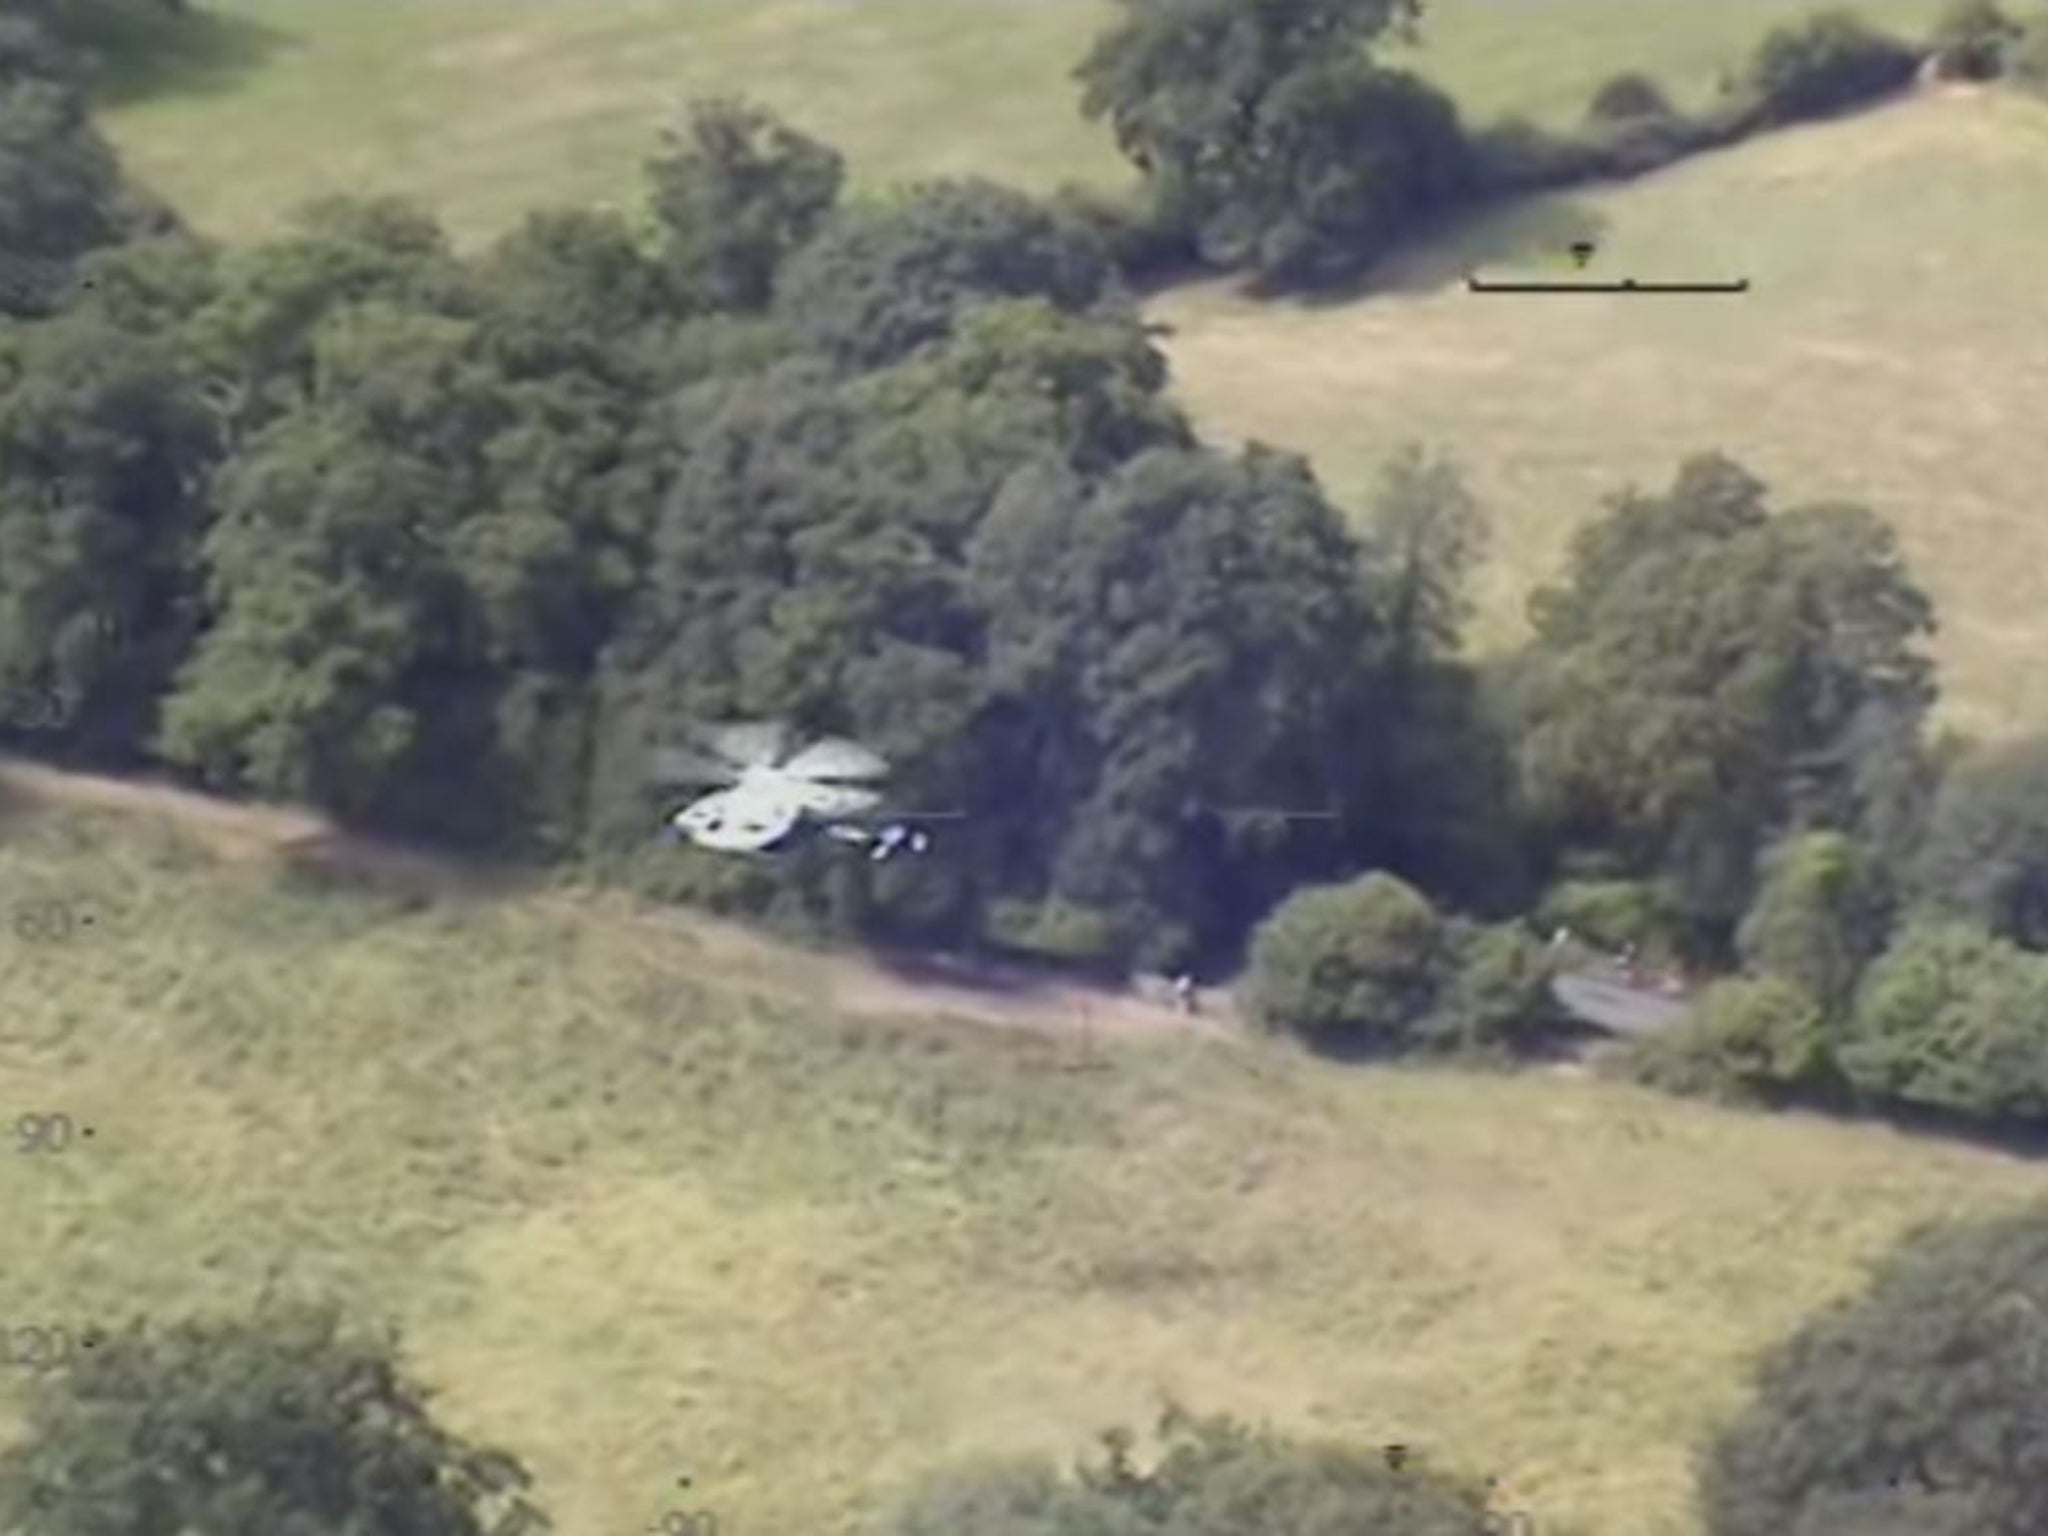 A screen grab showing an air ambulance landing on Leith Hill to treat the cyclist